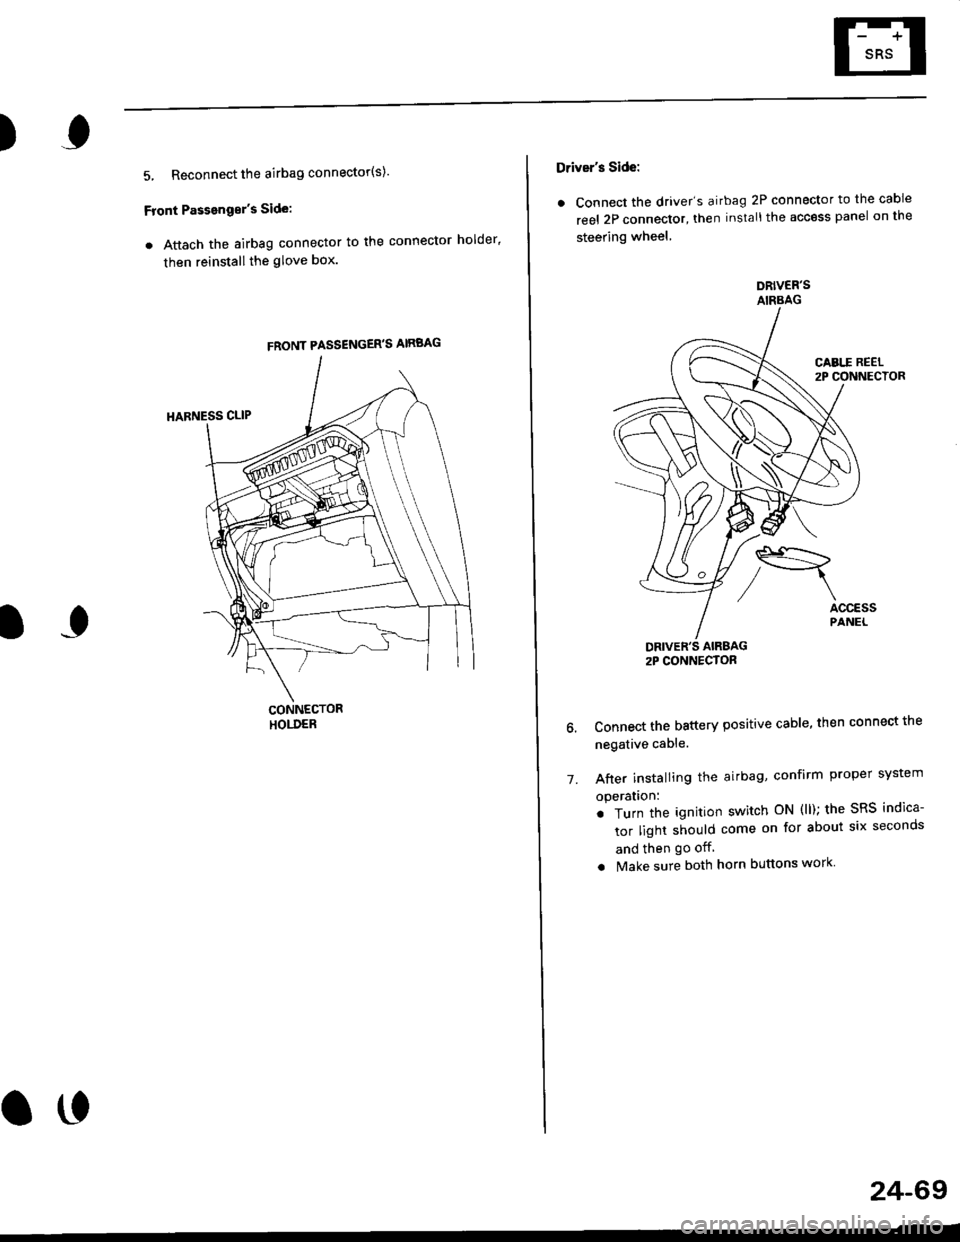 HONDA CIVIC 2000 6.G Owners Guide )
5, Reconnect the airbag connector(s)
Front Passengors Side:
a Attach the airbag connector to the connector holder
then reinstallthe glove box.
FRONT PASSENGERS AIRBAG
oo
24-69
Drivers Side:
a C